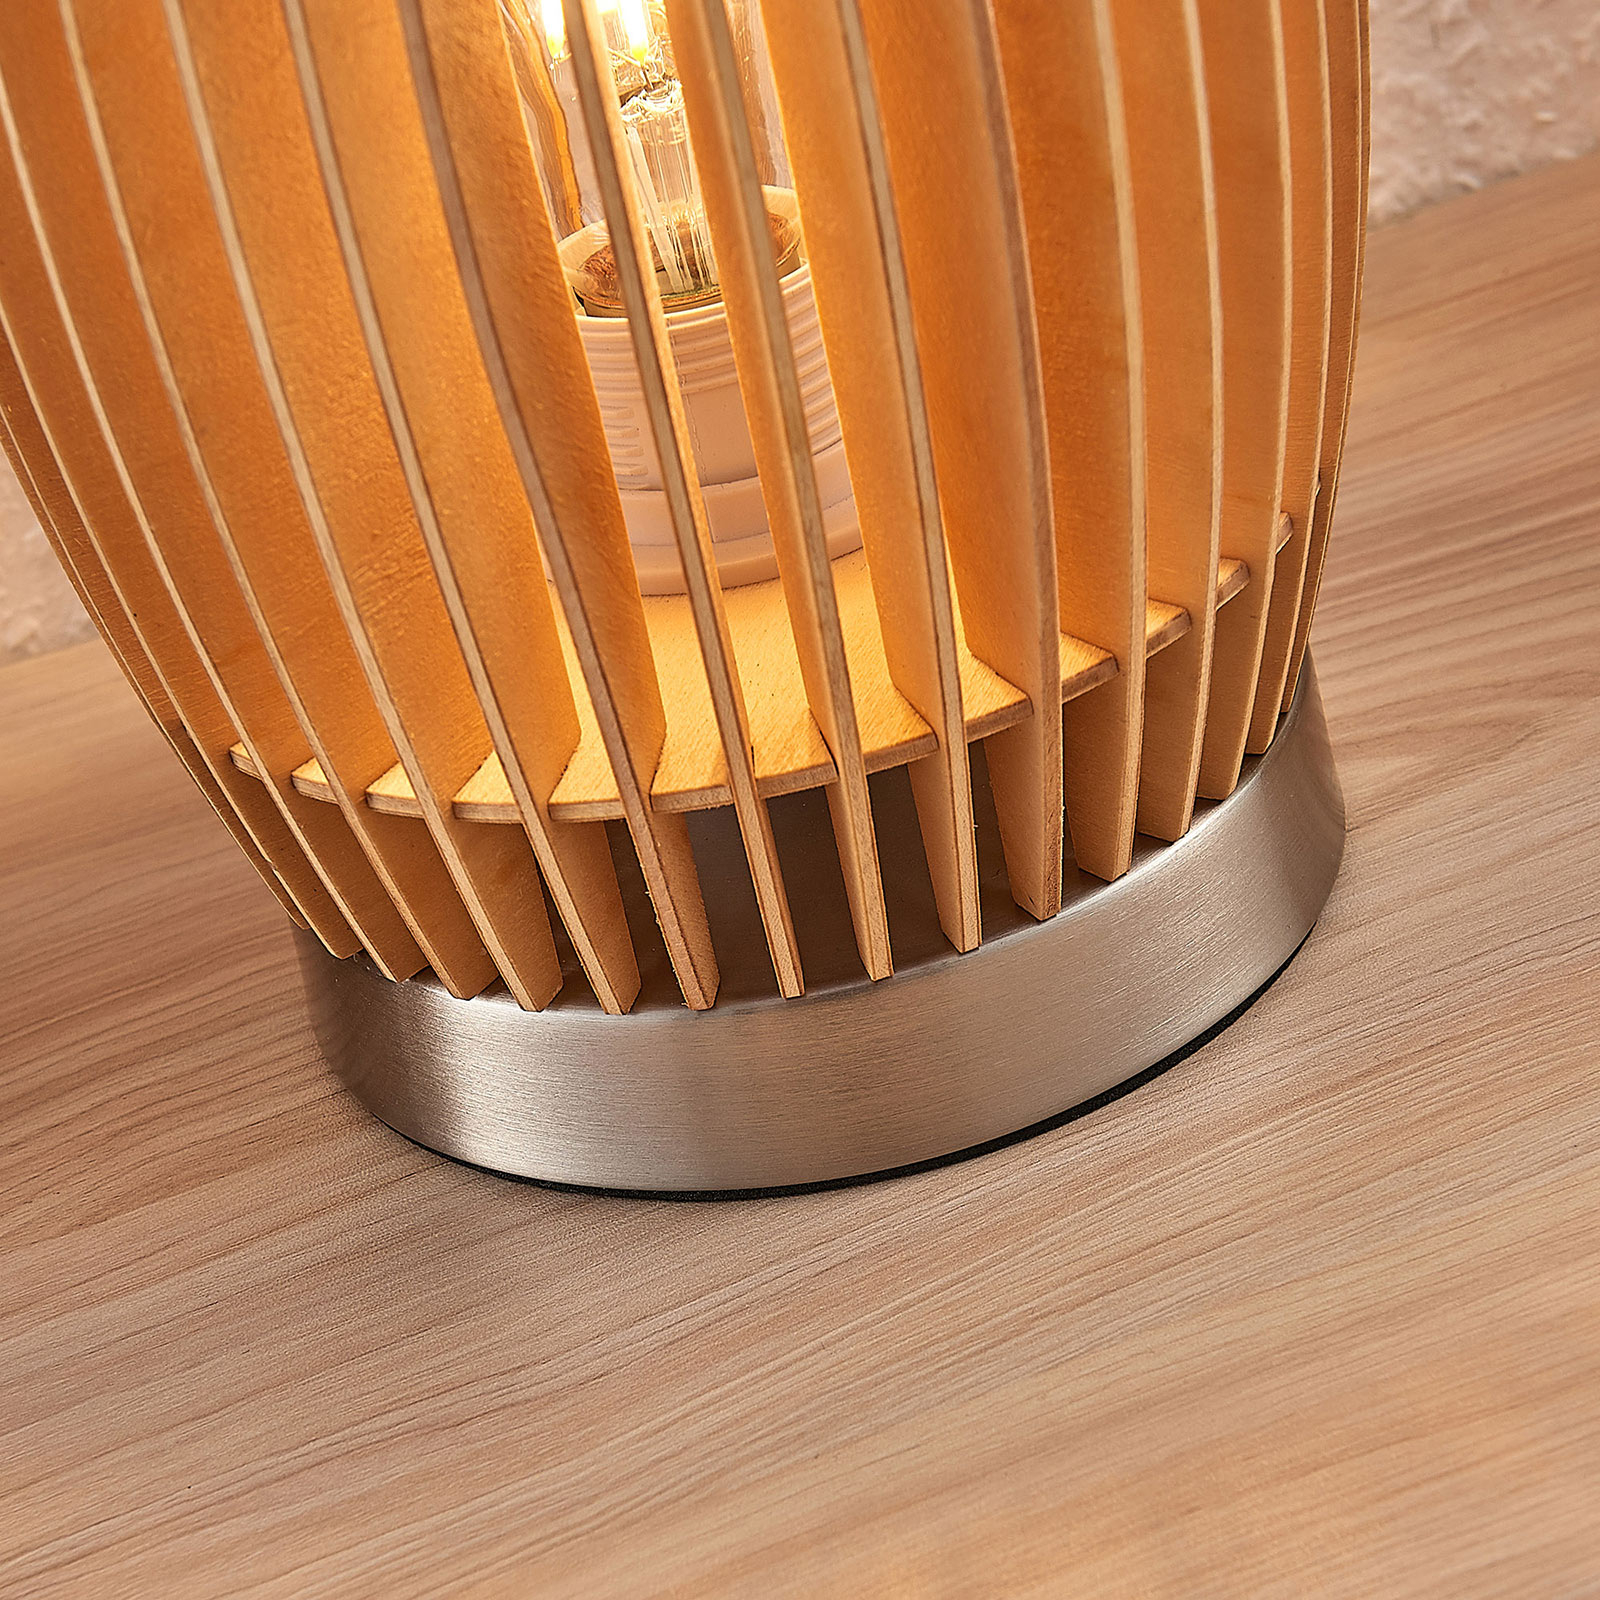 Jemile table lamp with birch wood slats